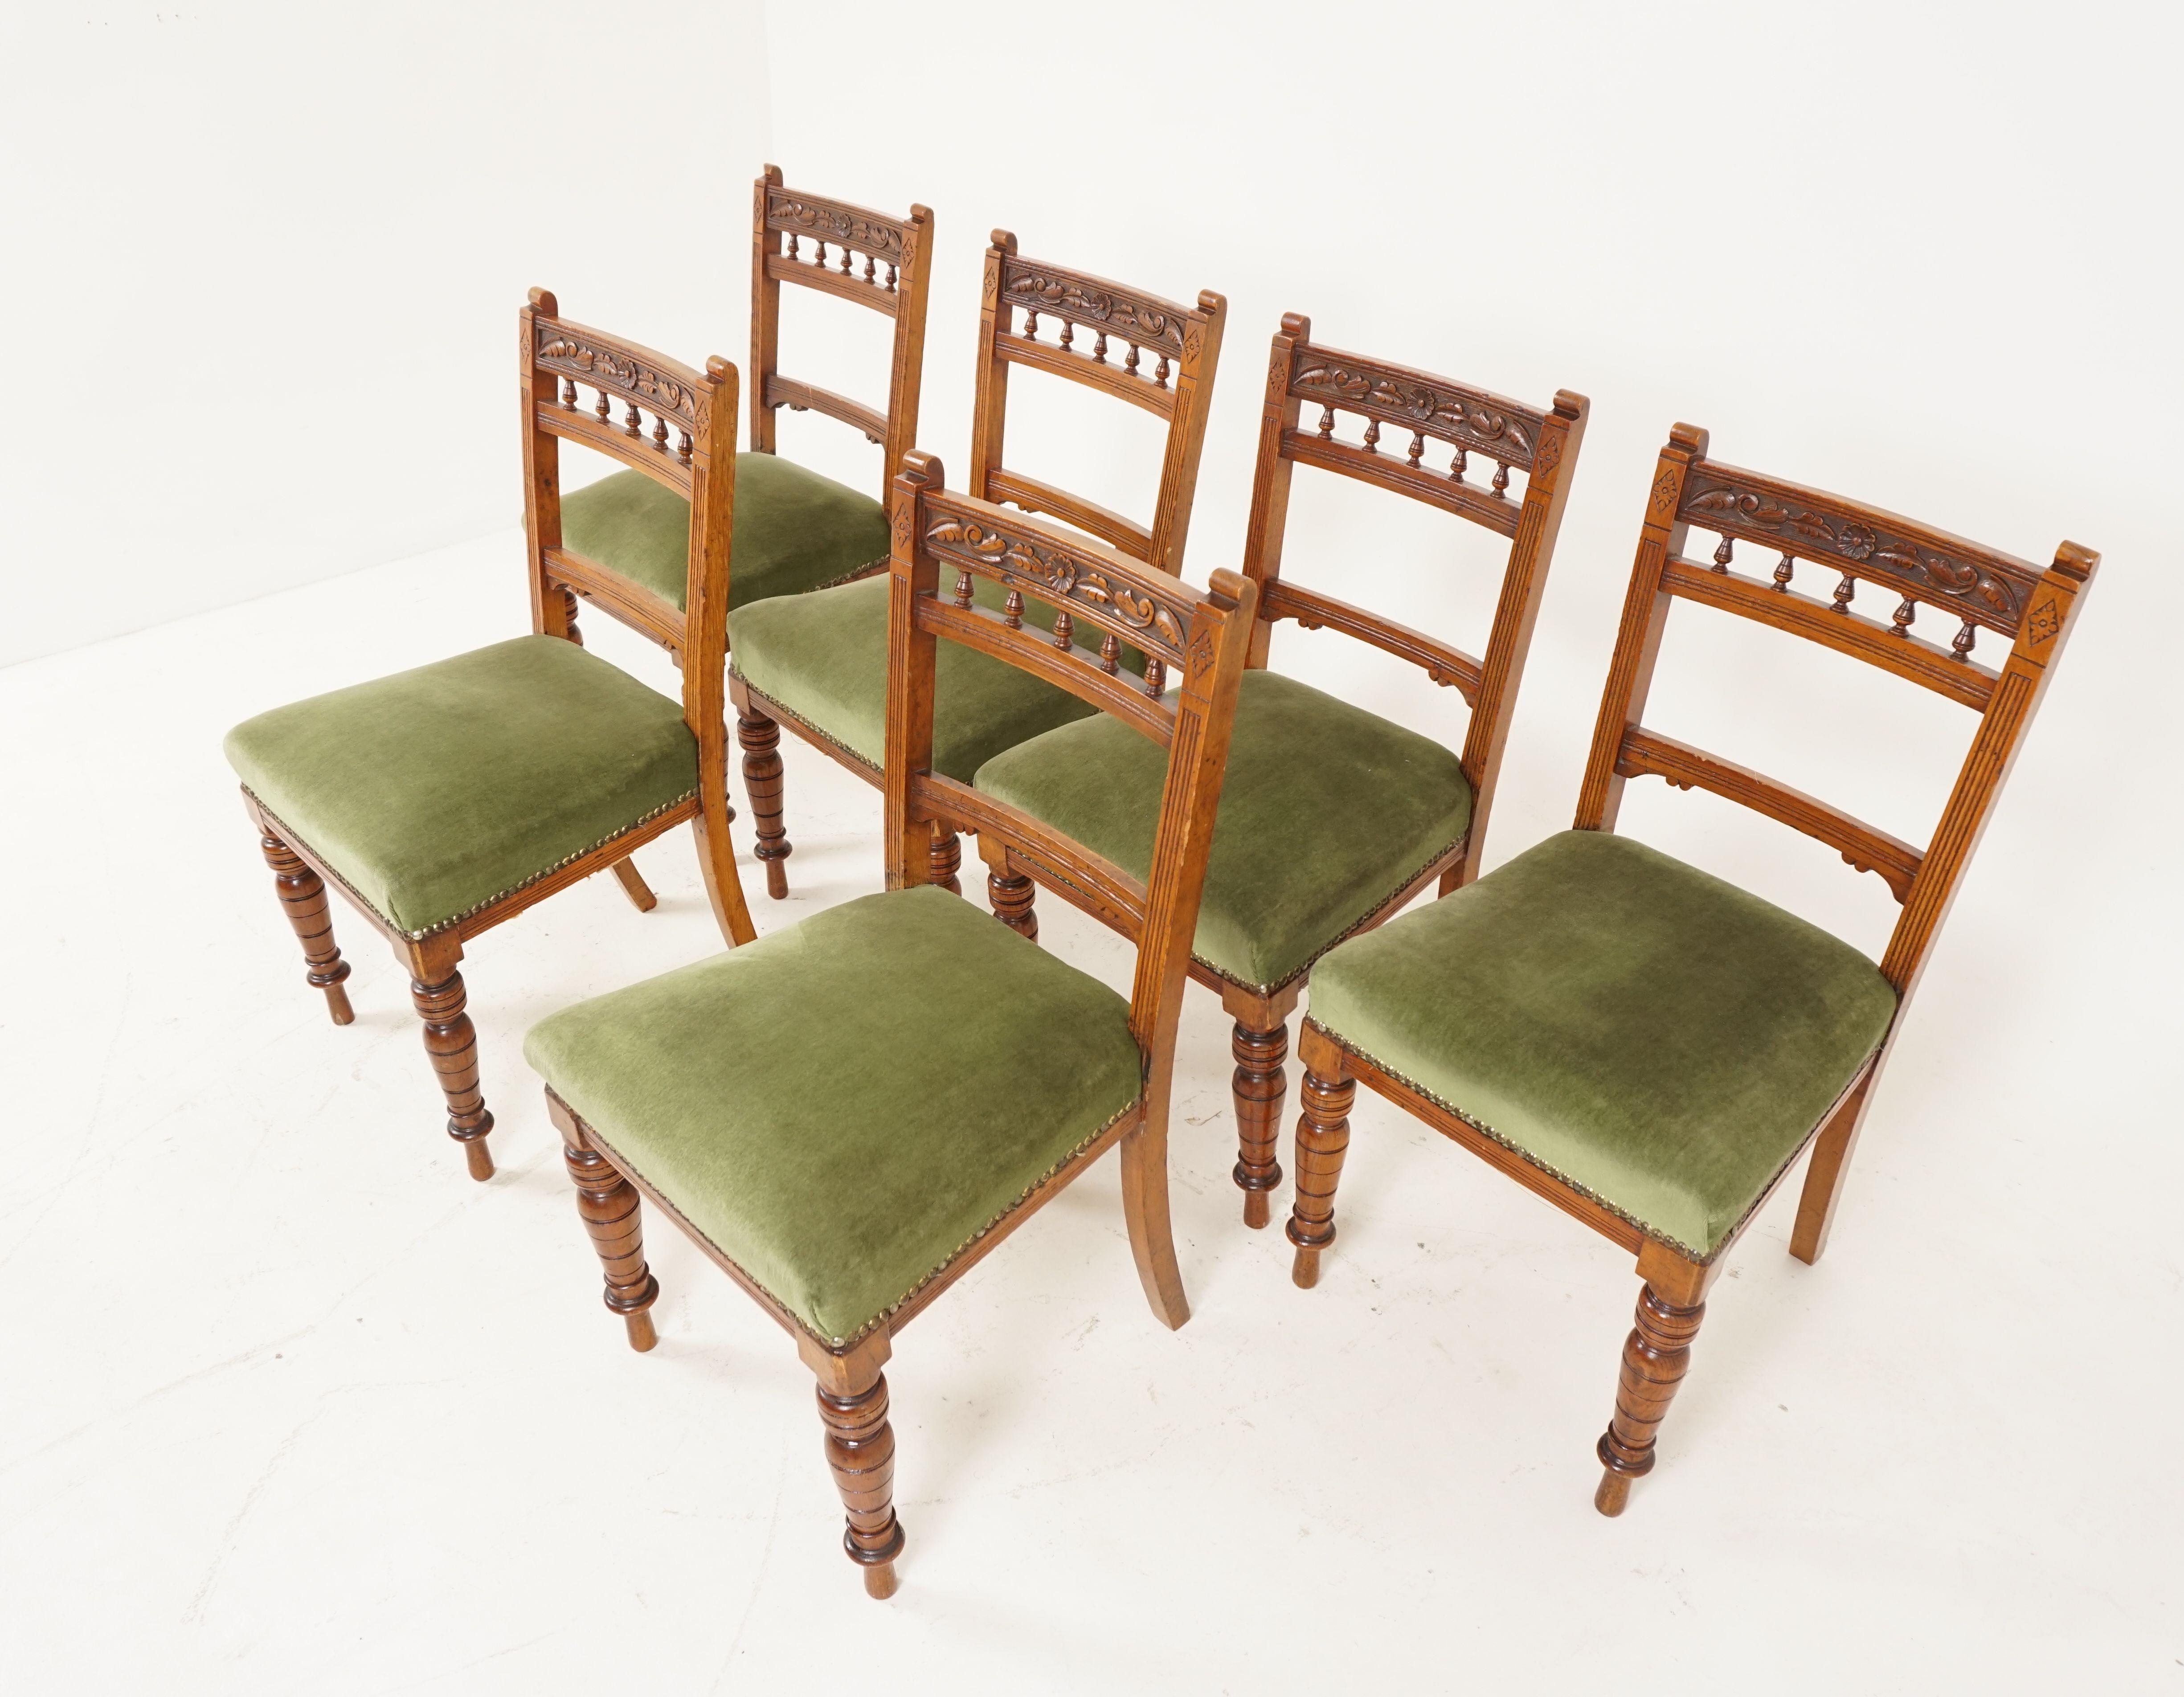 Hand-Crafted Antique Victorian Chairs, Set of 6 Carved Oak Dining Chairs, Scotland 1890 B2086